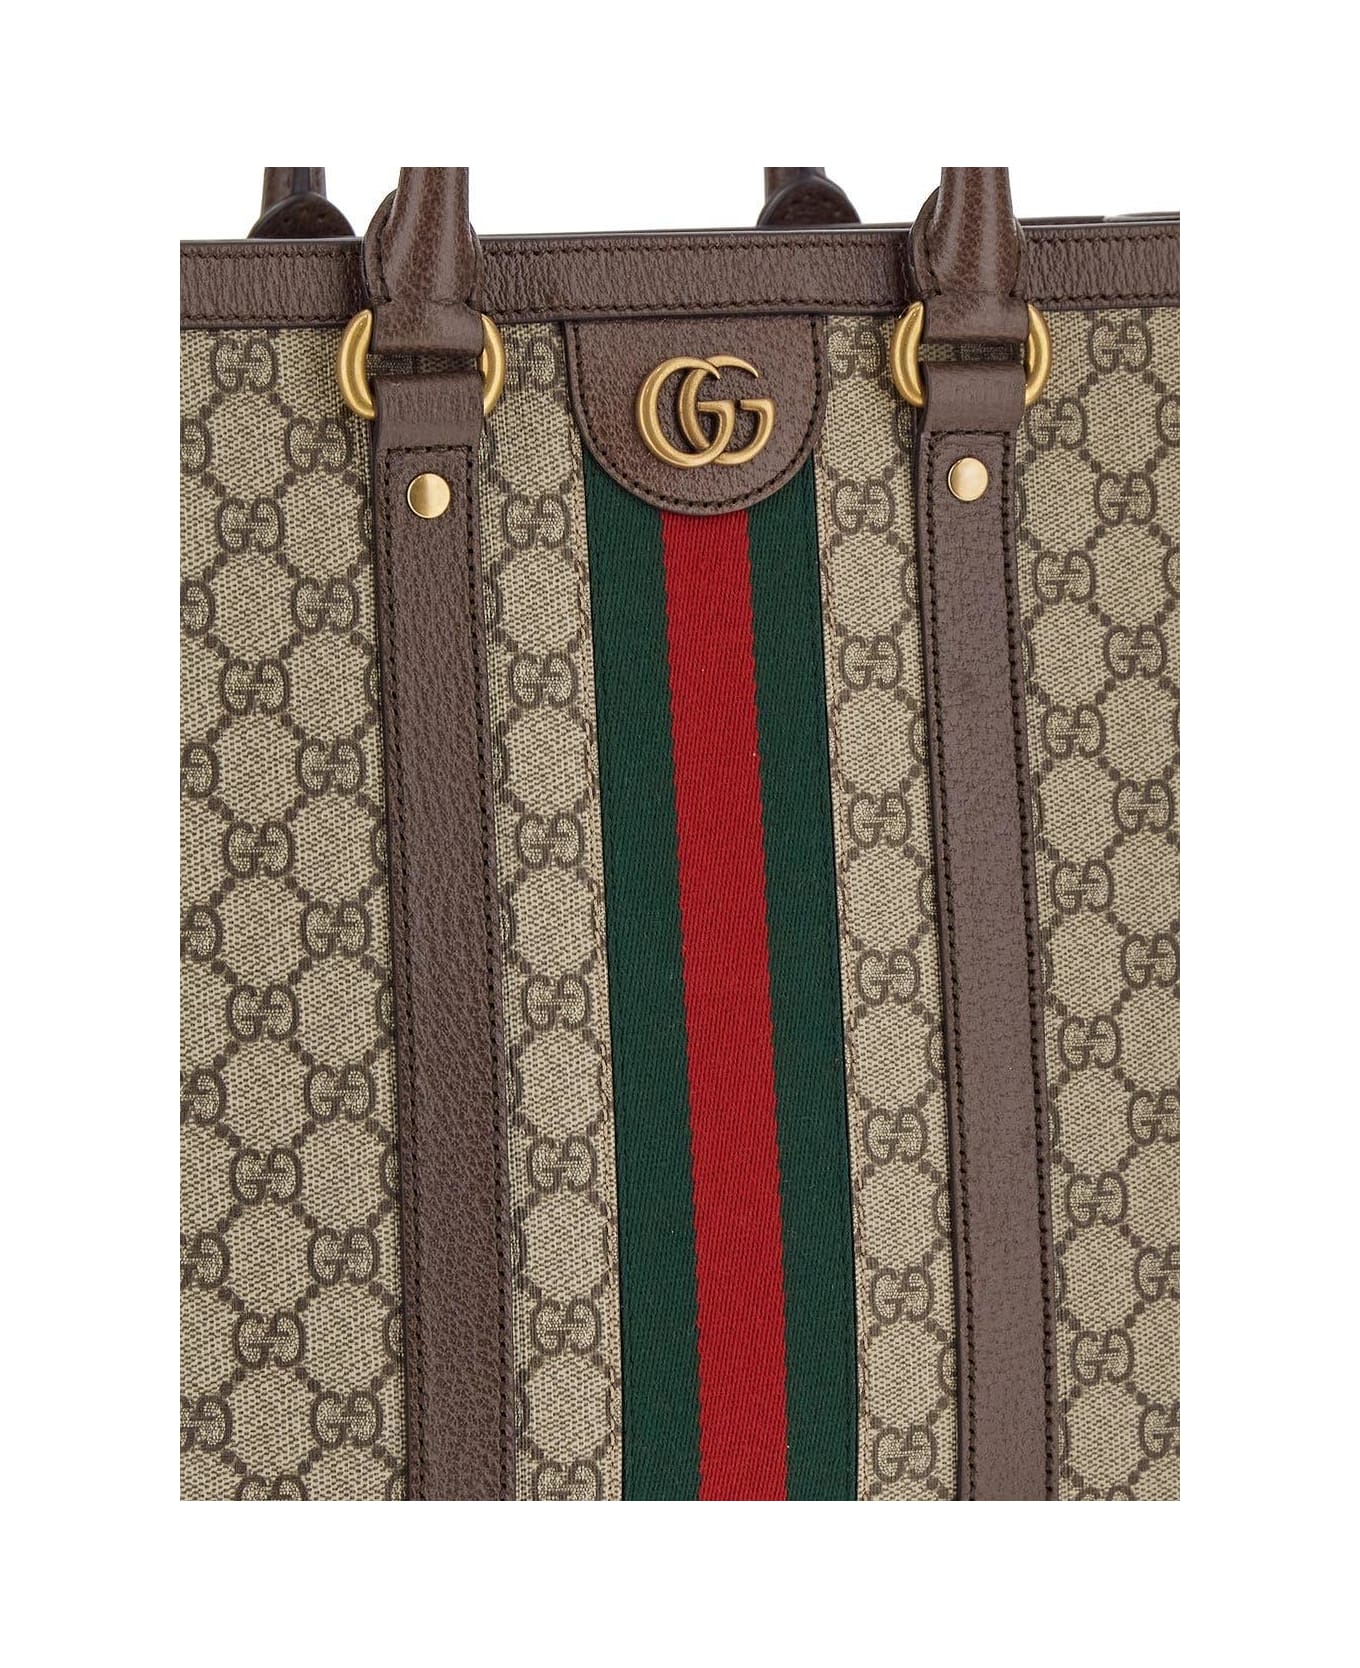 Gucci Ophidia Tote Bag - Acero トートバッグ